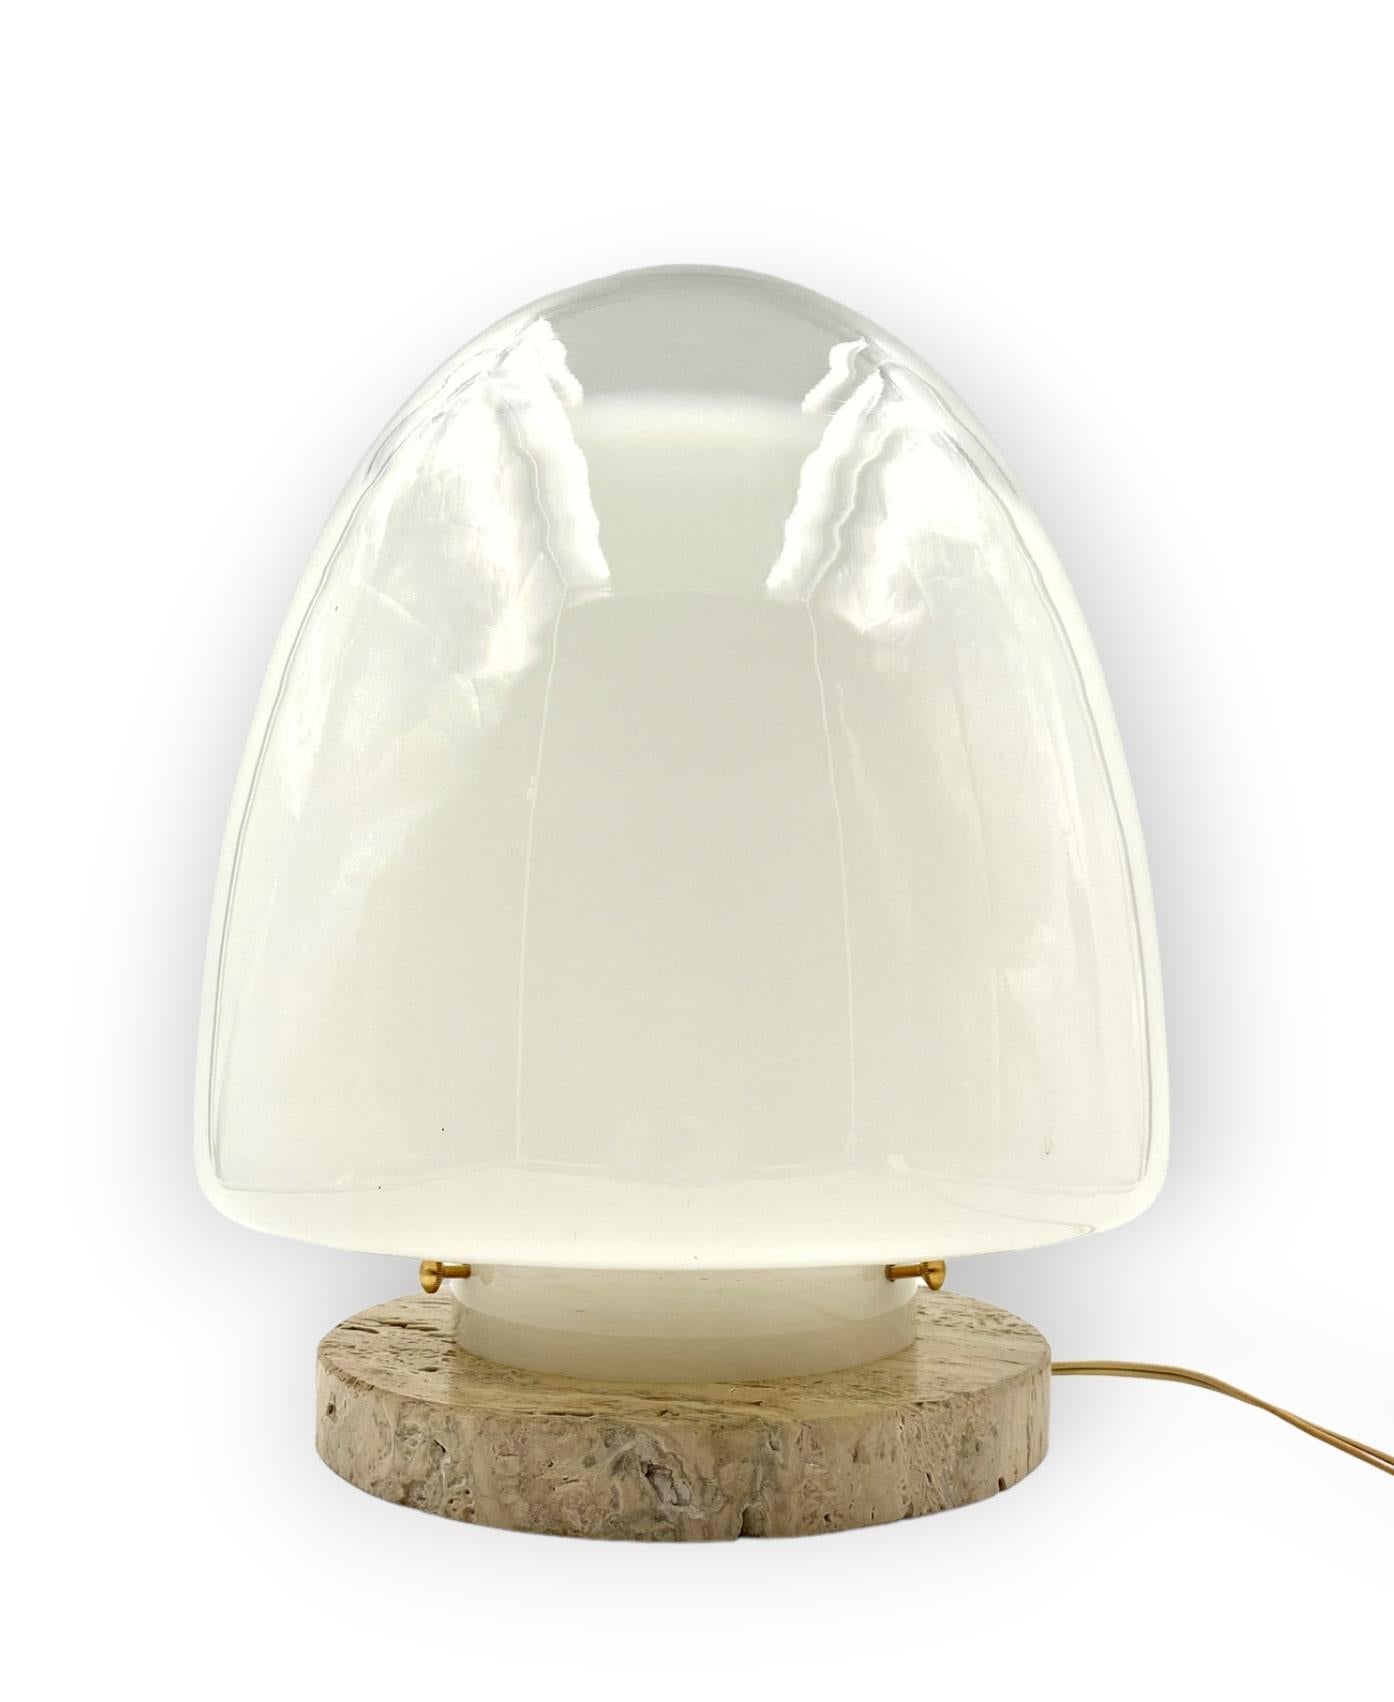 Murano Glass Giusto Toso Murano Art Glass and Travertine Table Lamp, Leucos, Italy, 1970s For Sale